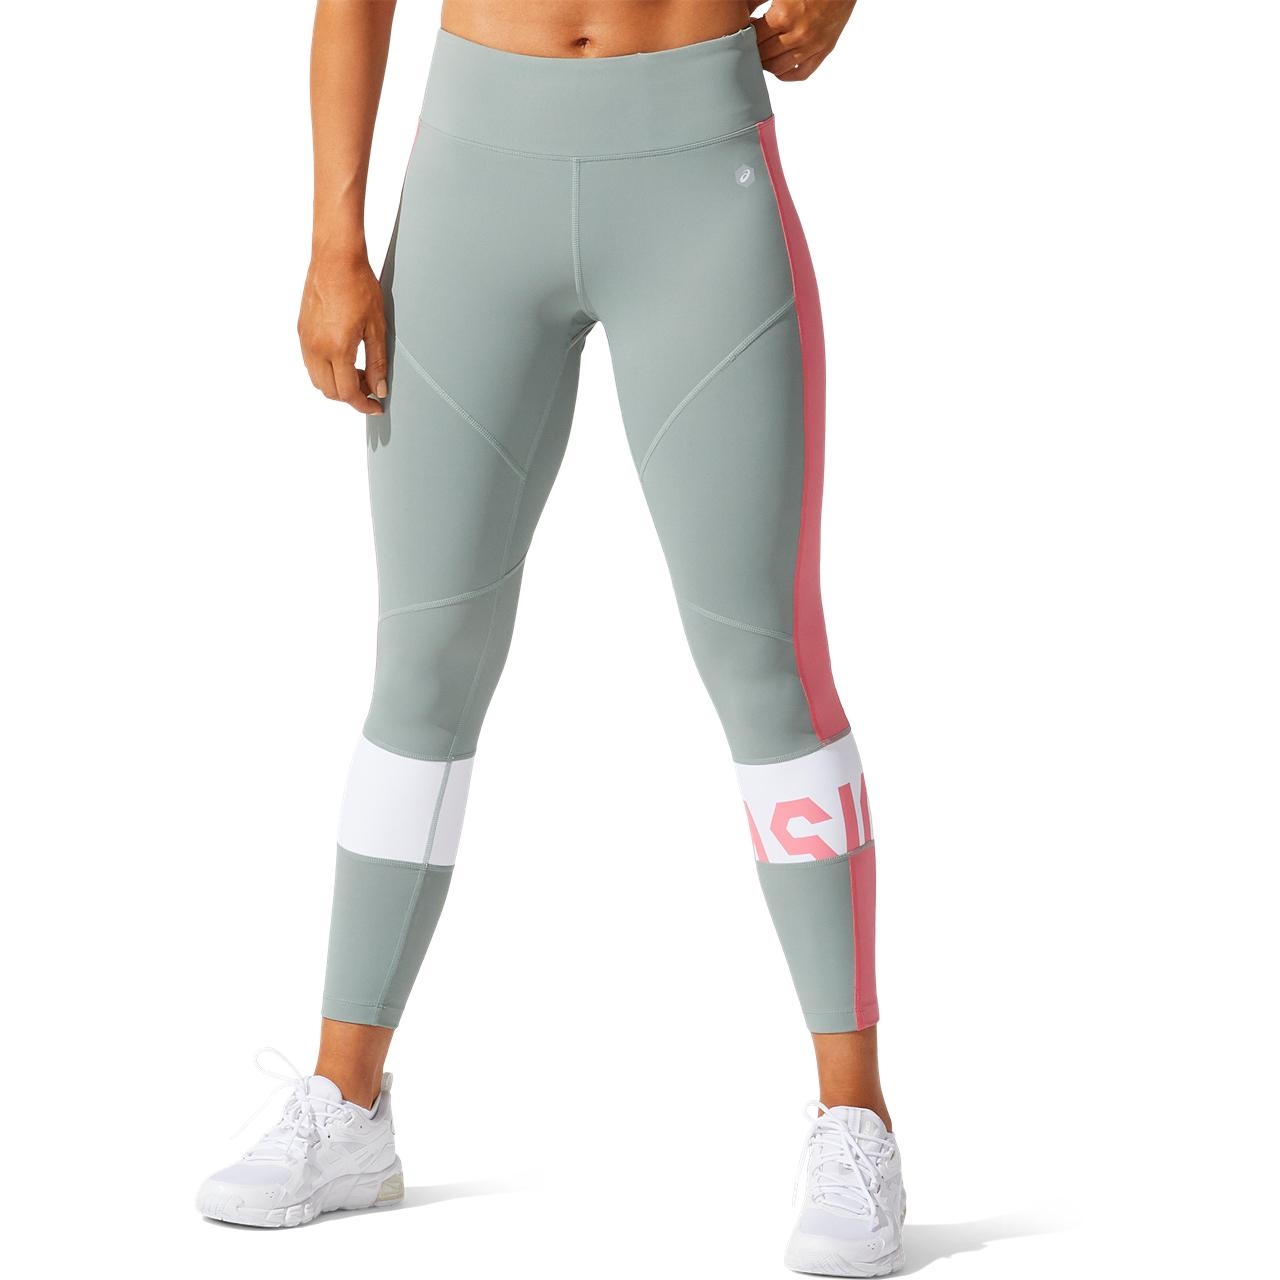 Image of asics Color Block Cropped Training Tights 2 Women - slate grey/peach petal